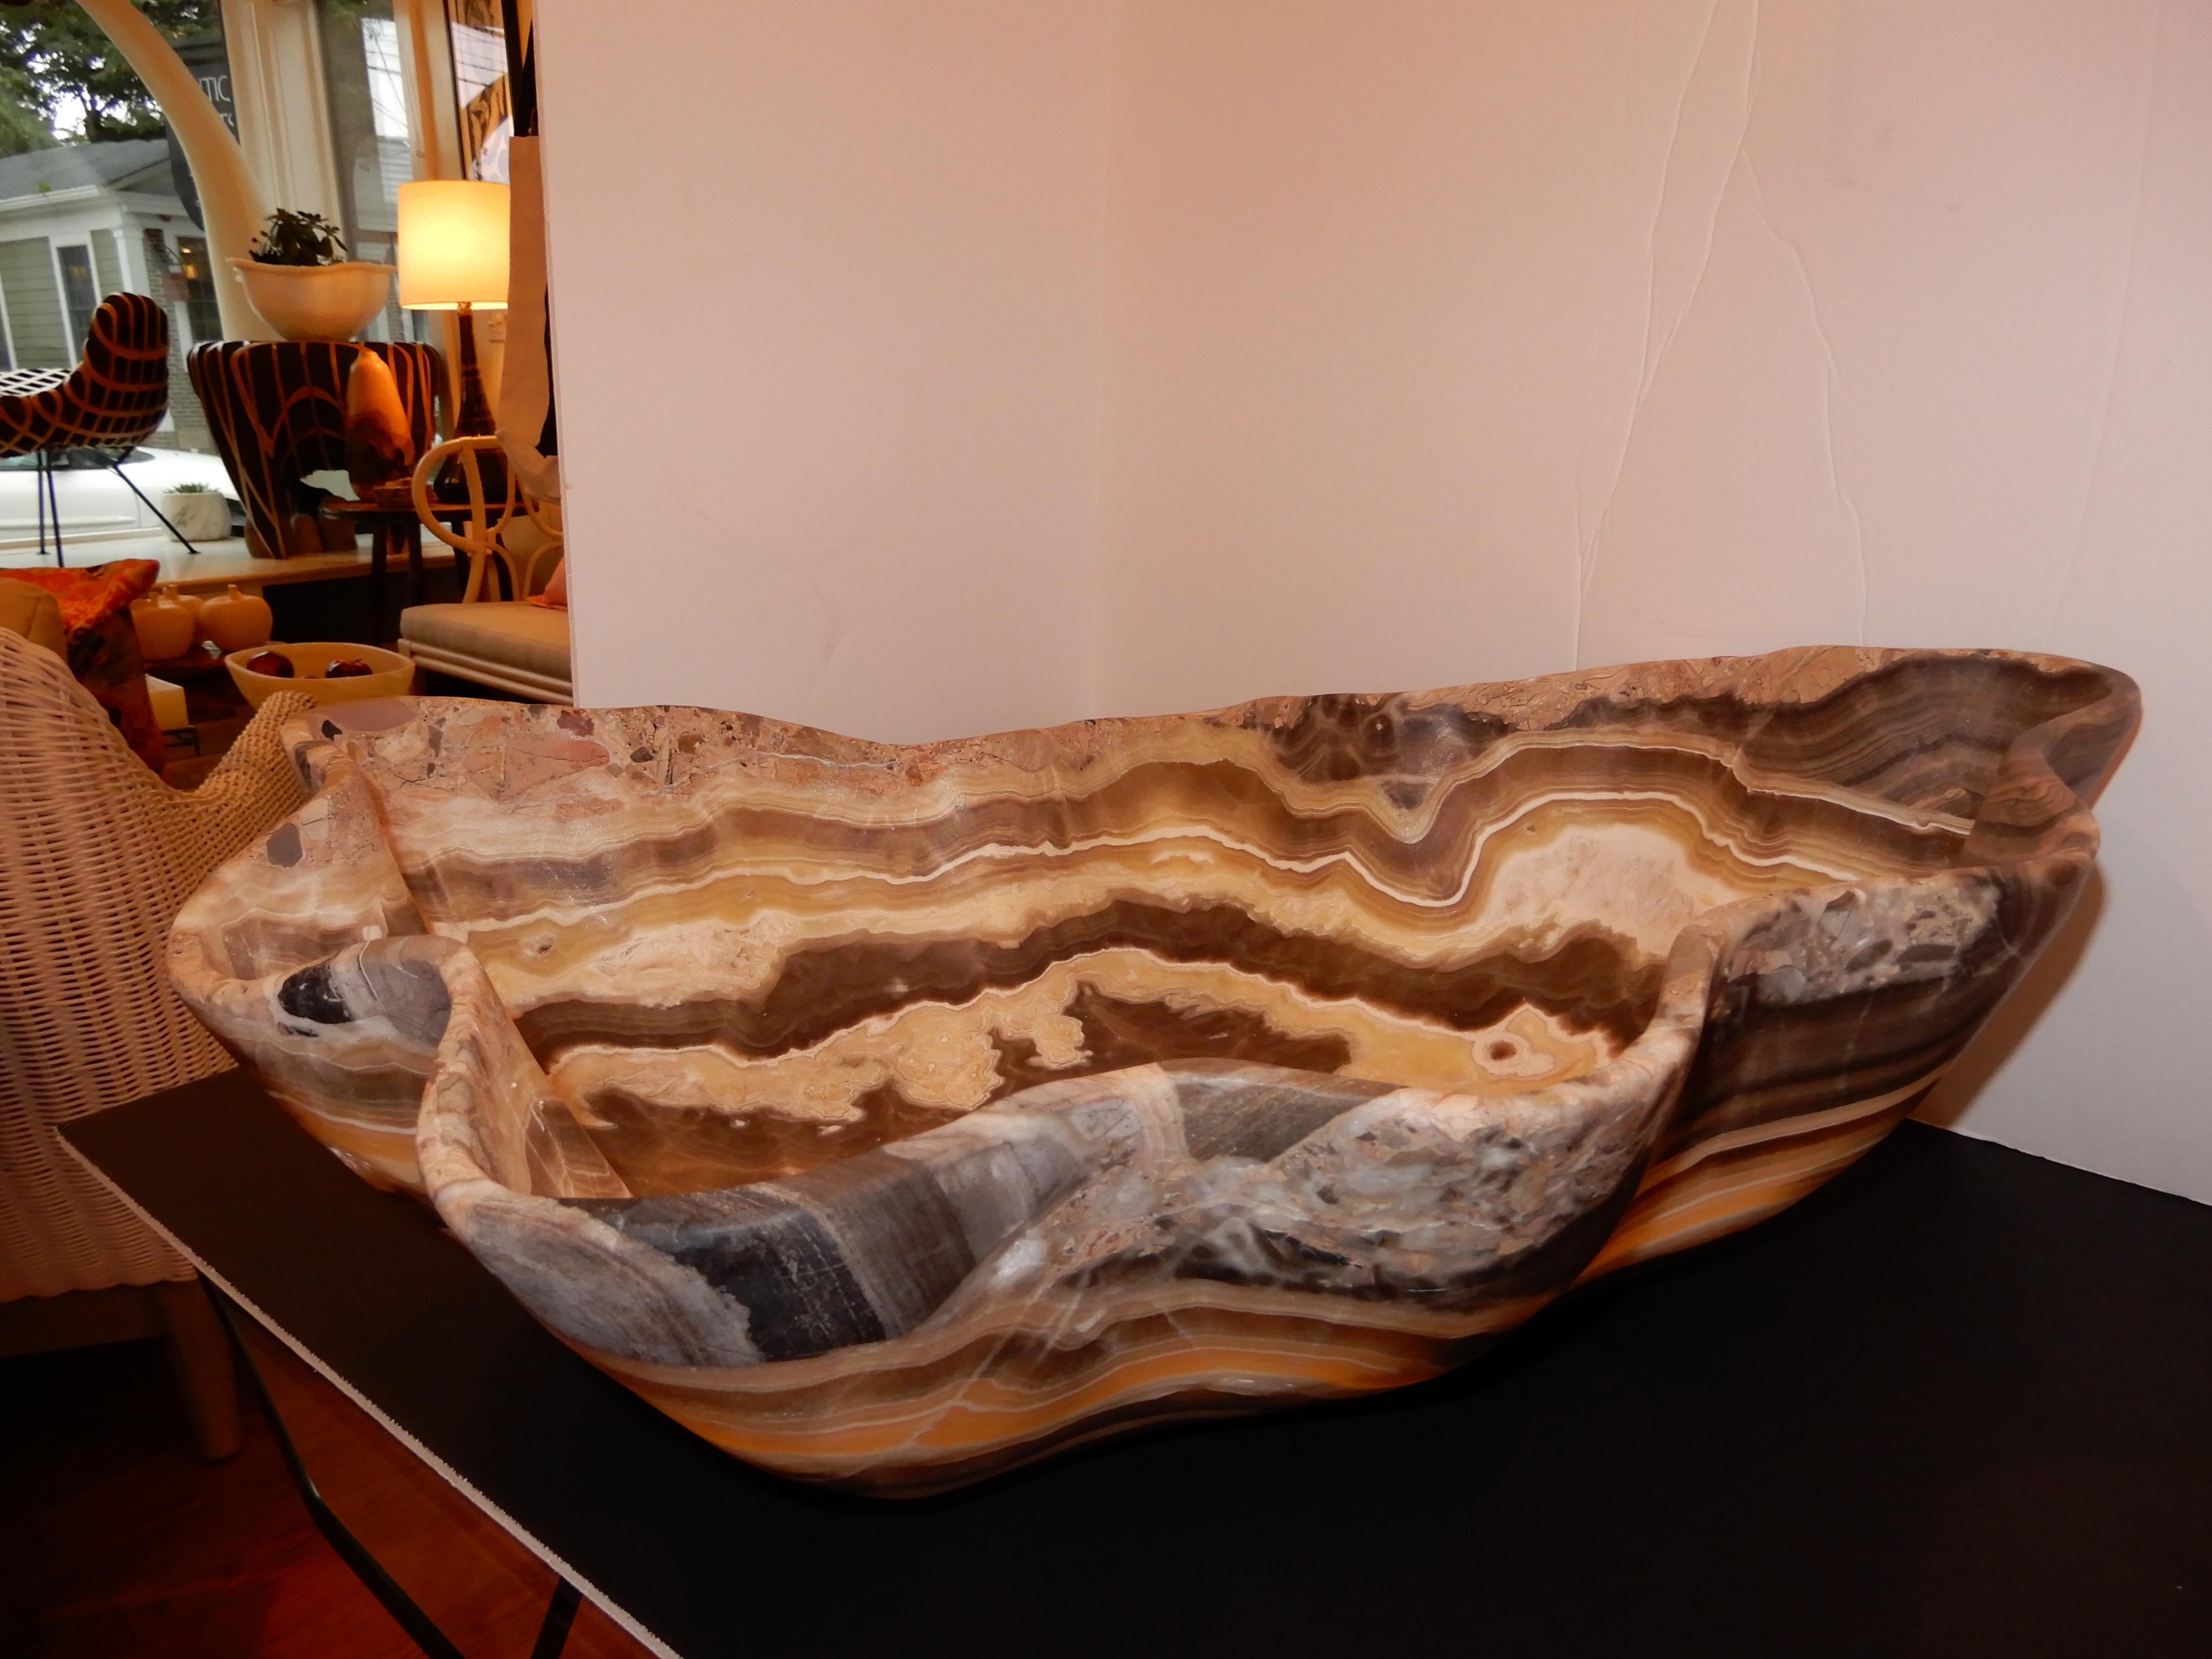 Hand-Crafted Monumental Artisan Crafted Onyx Bowl or Vessel